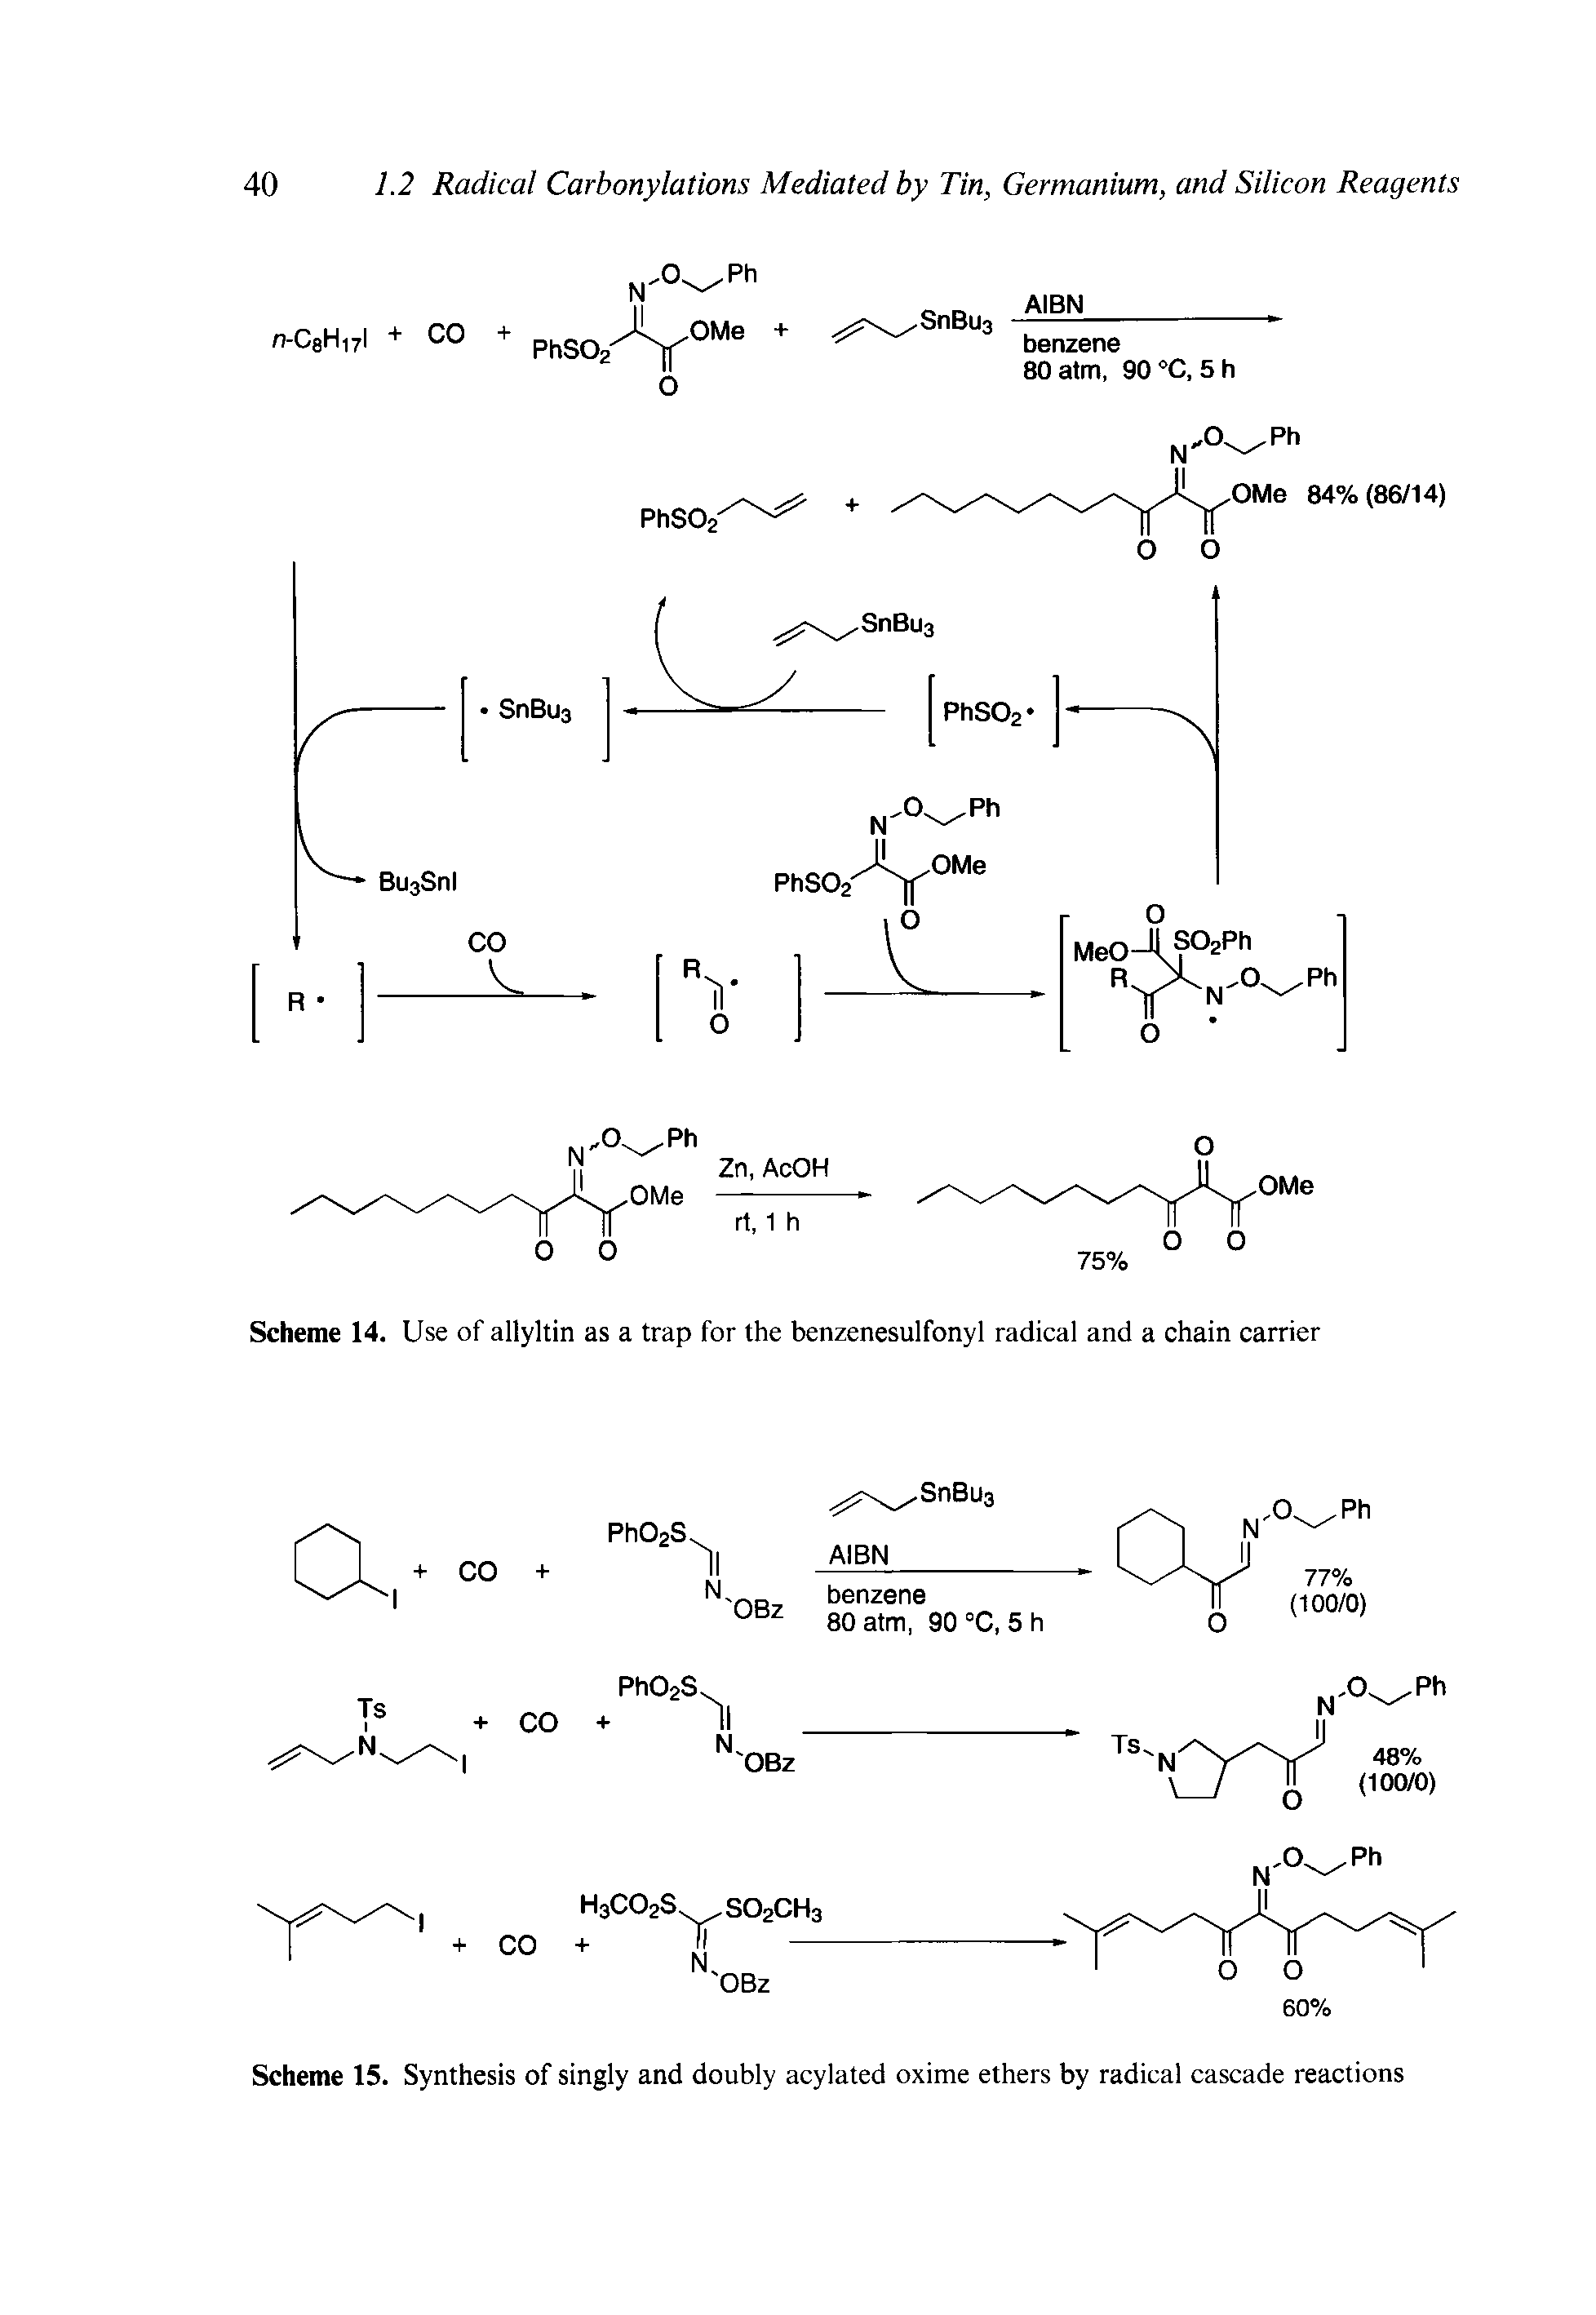 Scheme 15. Synthesis of singly and doubly acylated oxime ethers by radical cascade reactions...